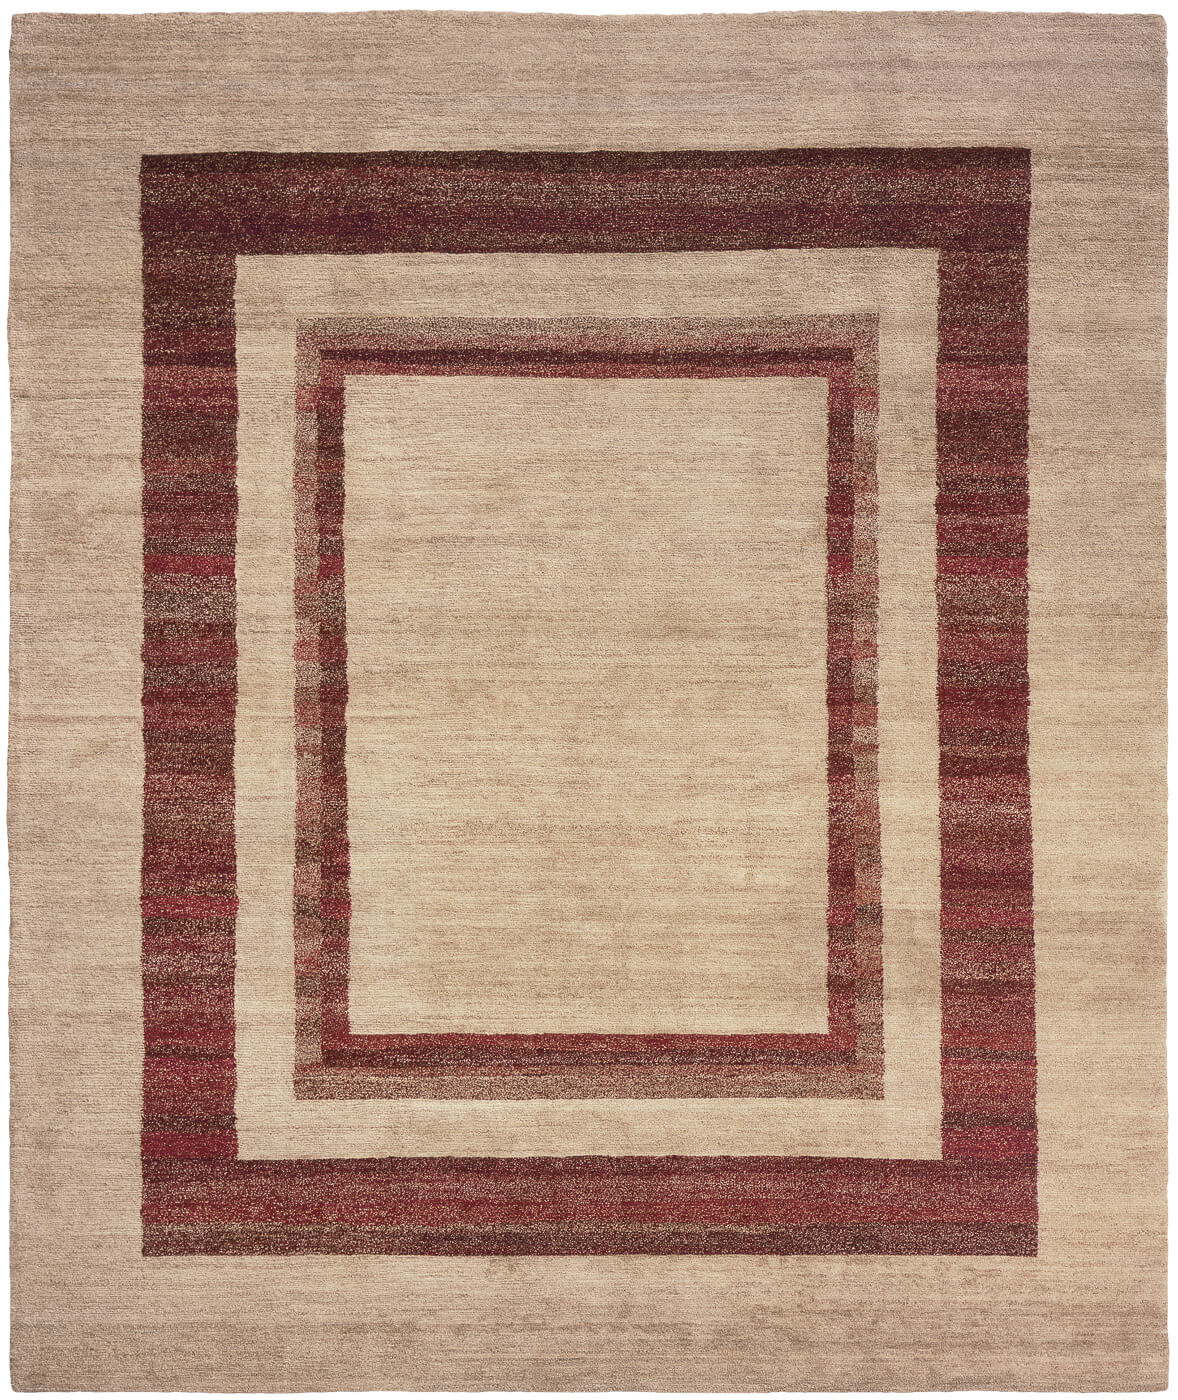 Triple Border Red Luxury Hand-woven Rug ☞ Size: 300 x 400 cm